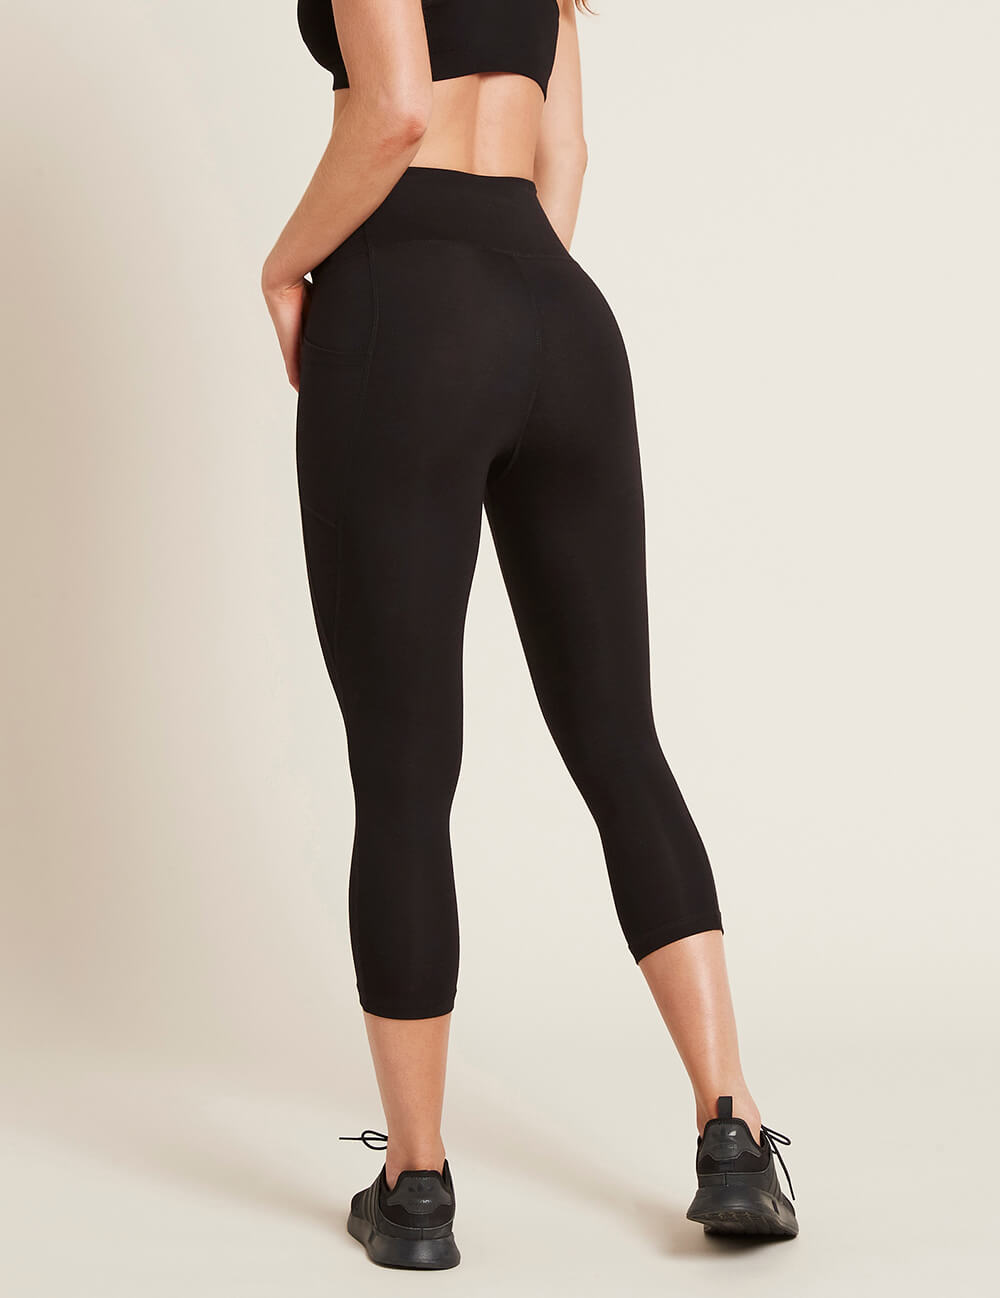 Boody Bamboo Active Blended High-Waisted 3/4 Leggings with Pockets in Black Rear View